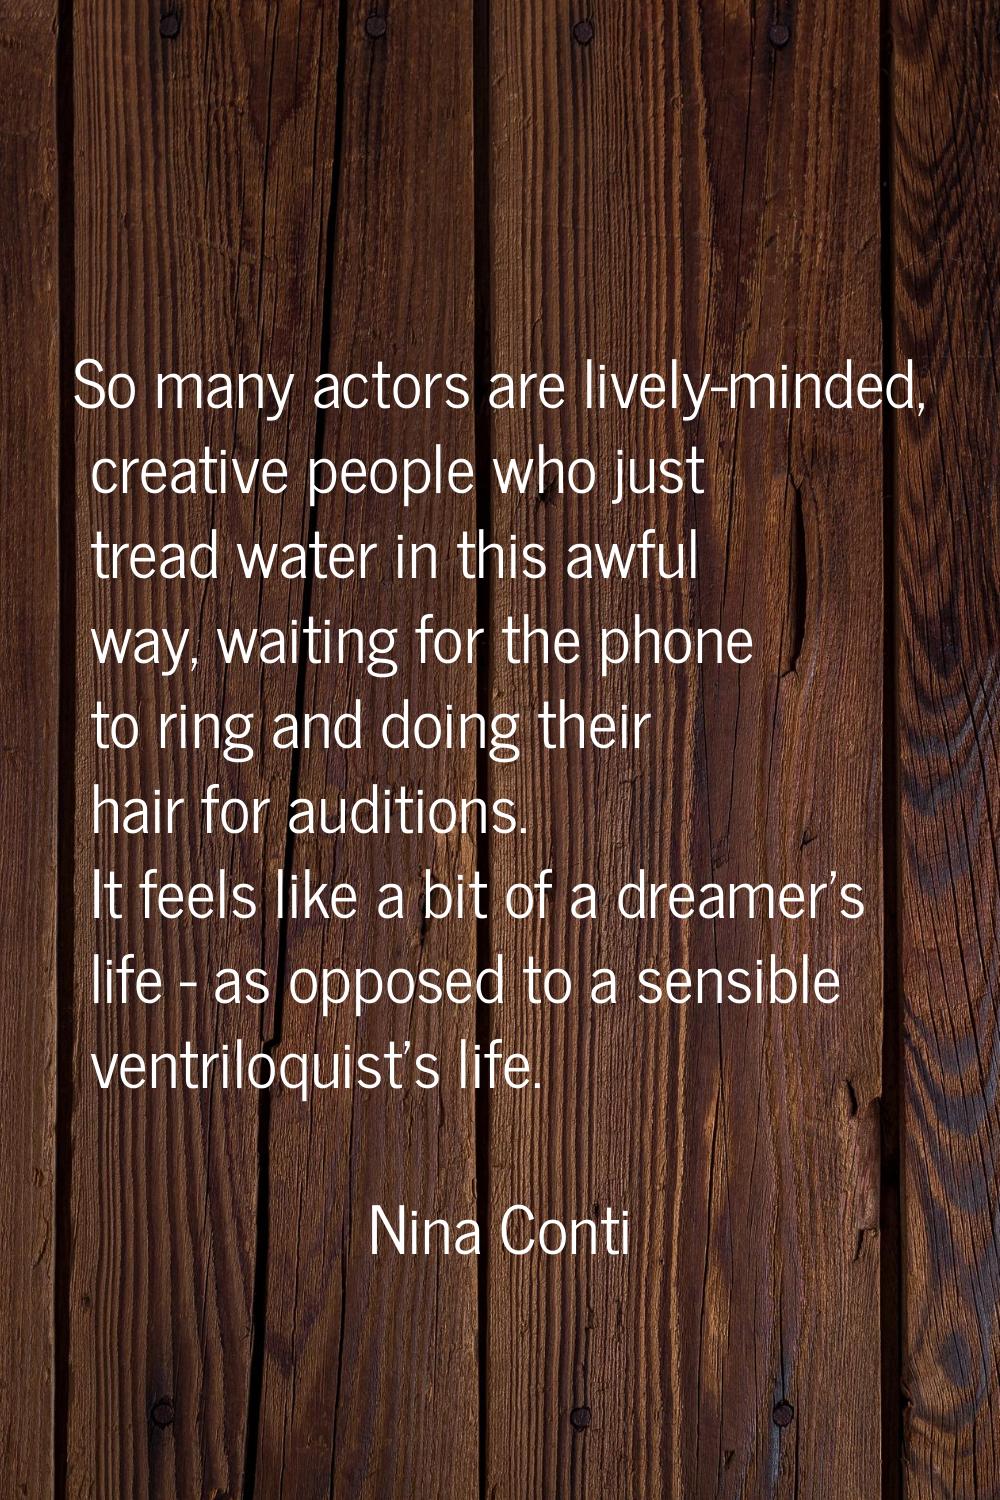 So many actors are lively-minded, creative people who just tread water in this awful way, waiting f